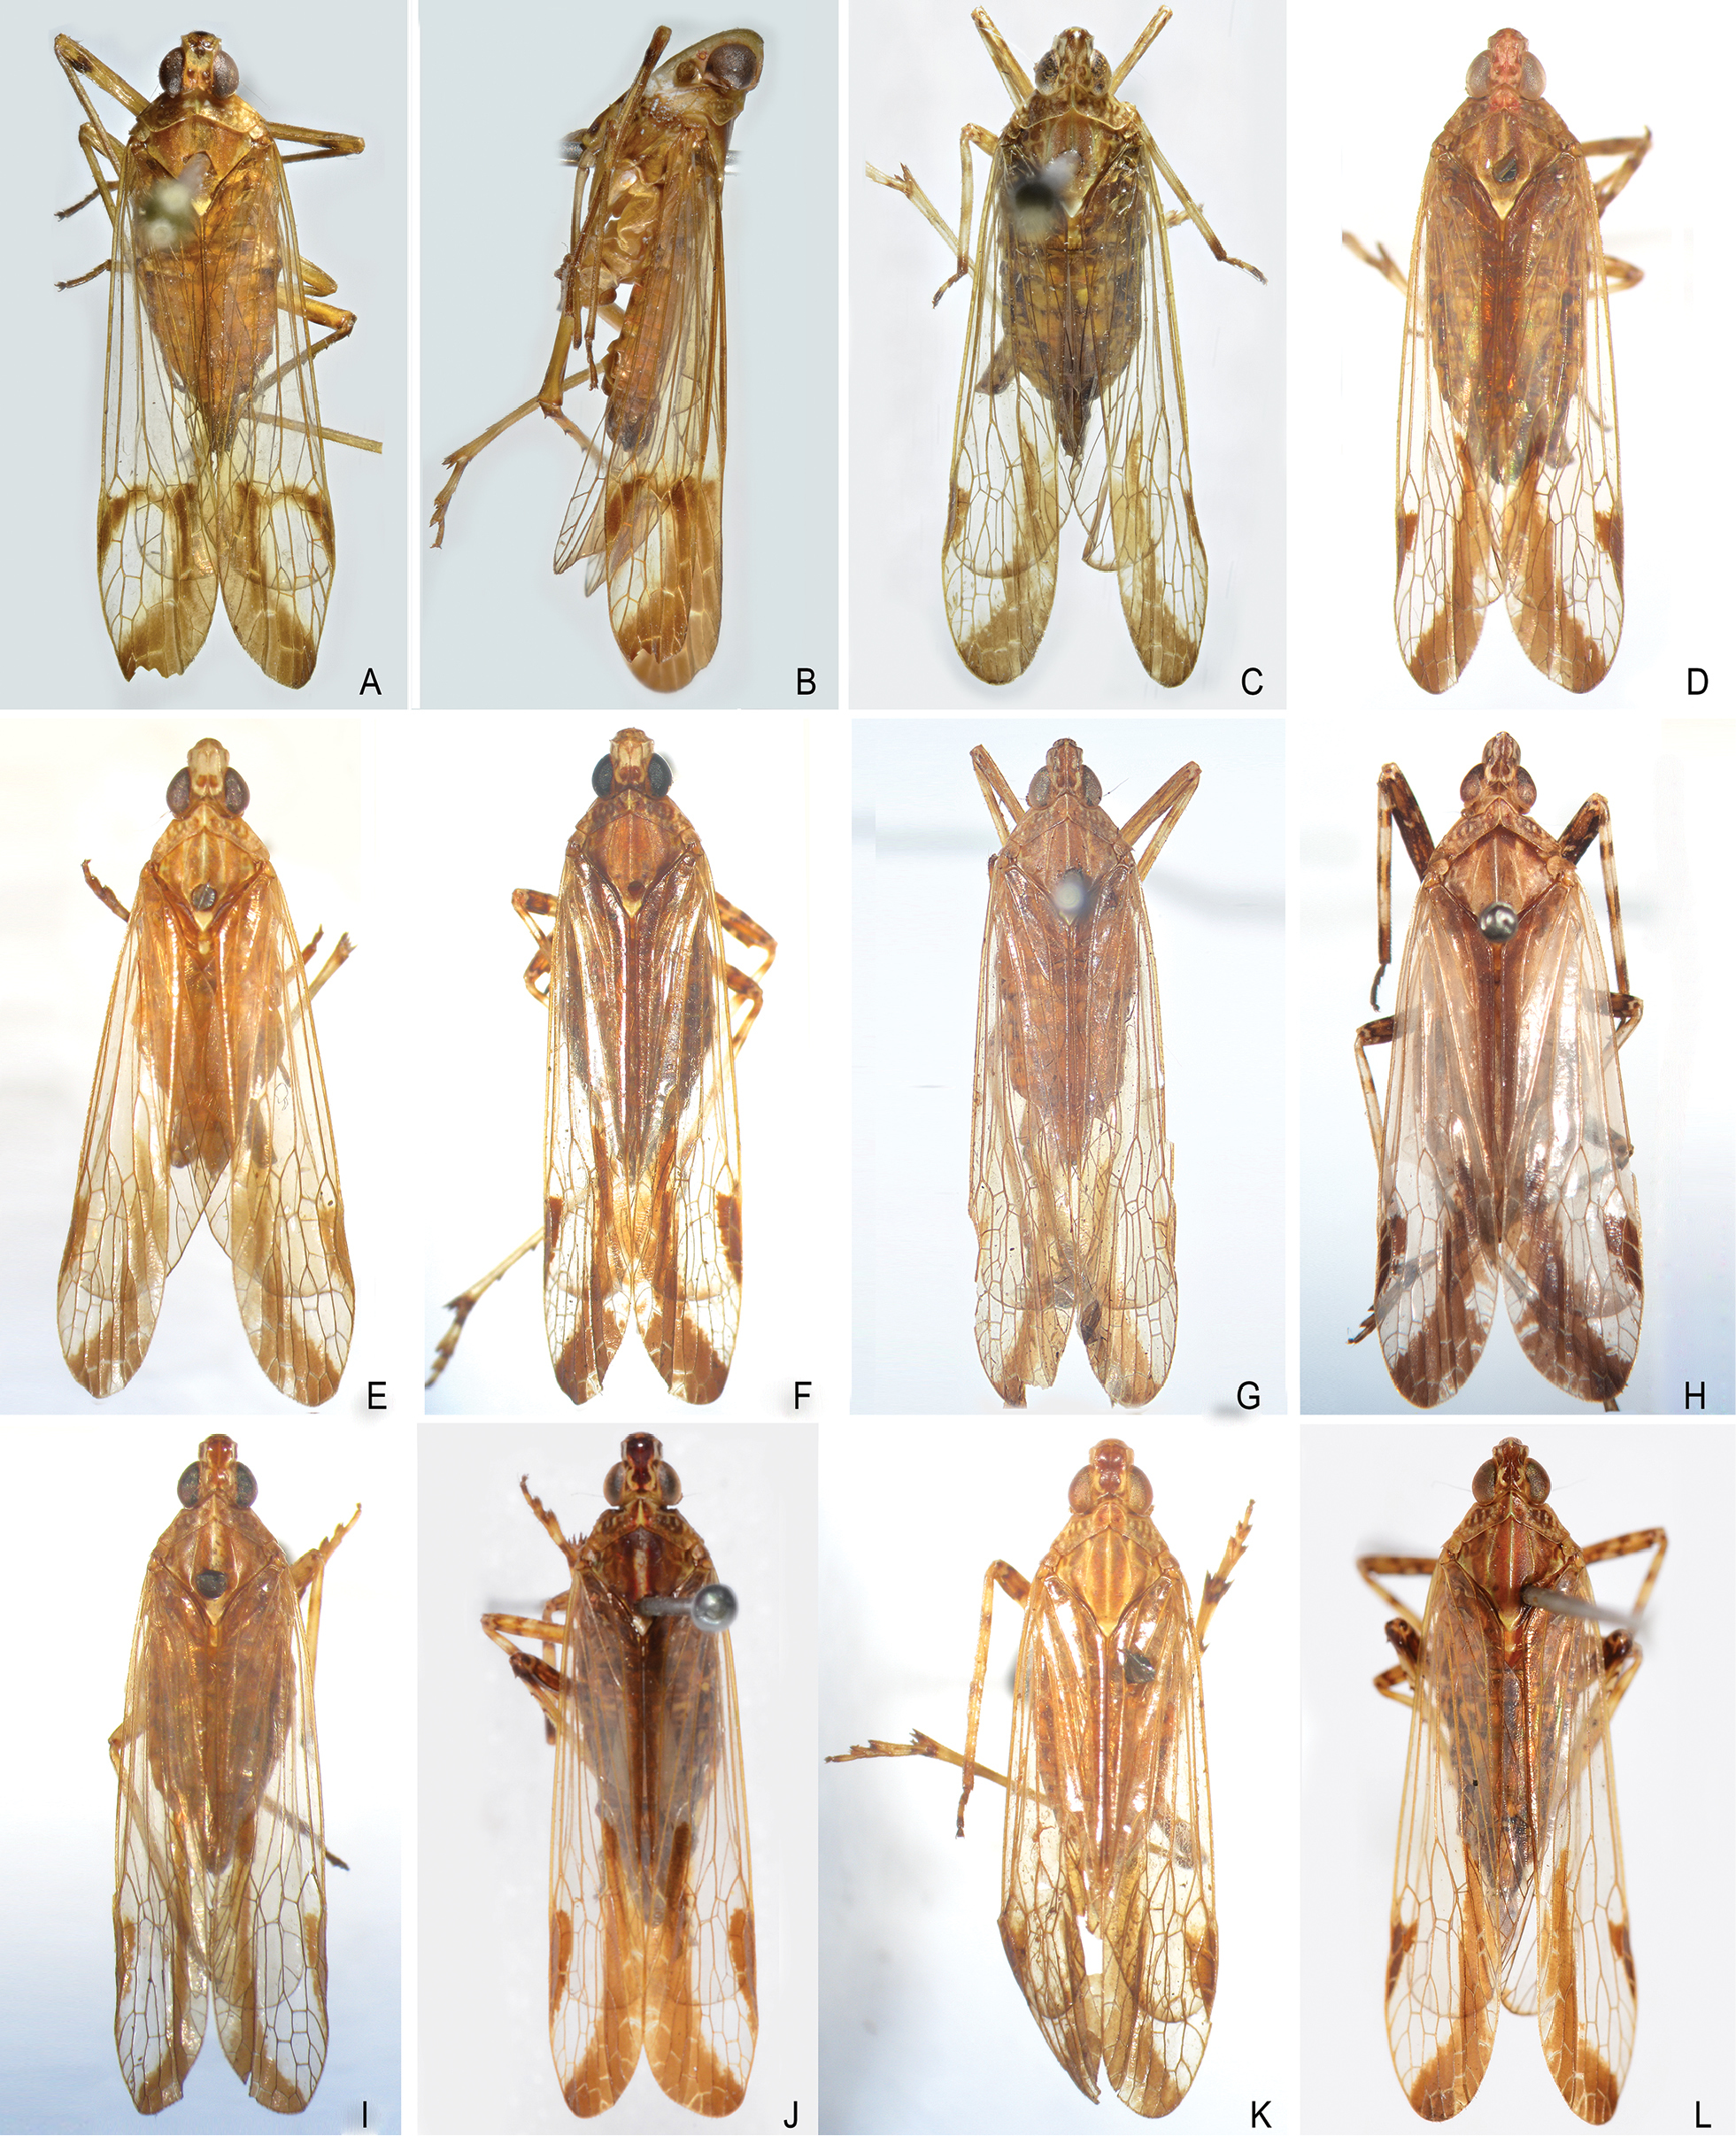 Taxonomic Review Of The Planthopper Genus Orthopagus Hemiptera Fulgoromorpha Dictyopharidae With Descriptions Of Two New Species